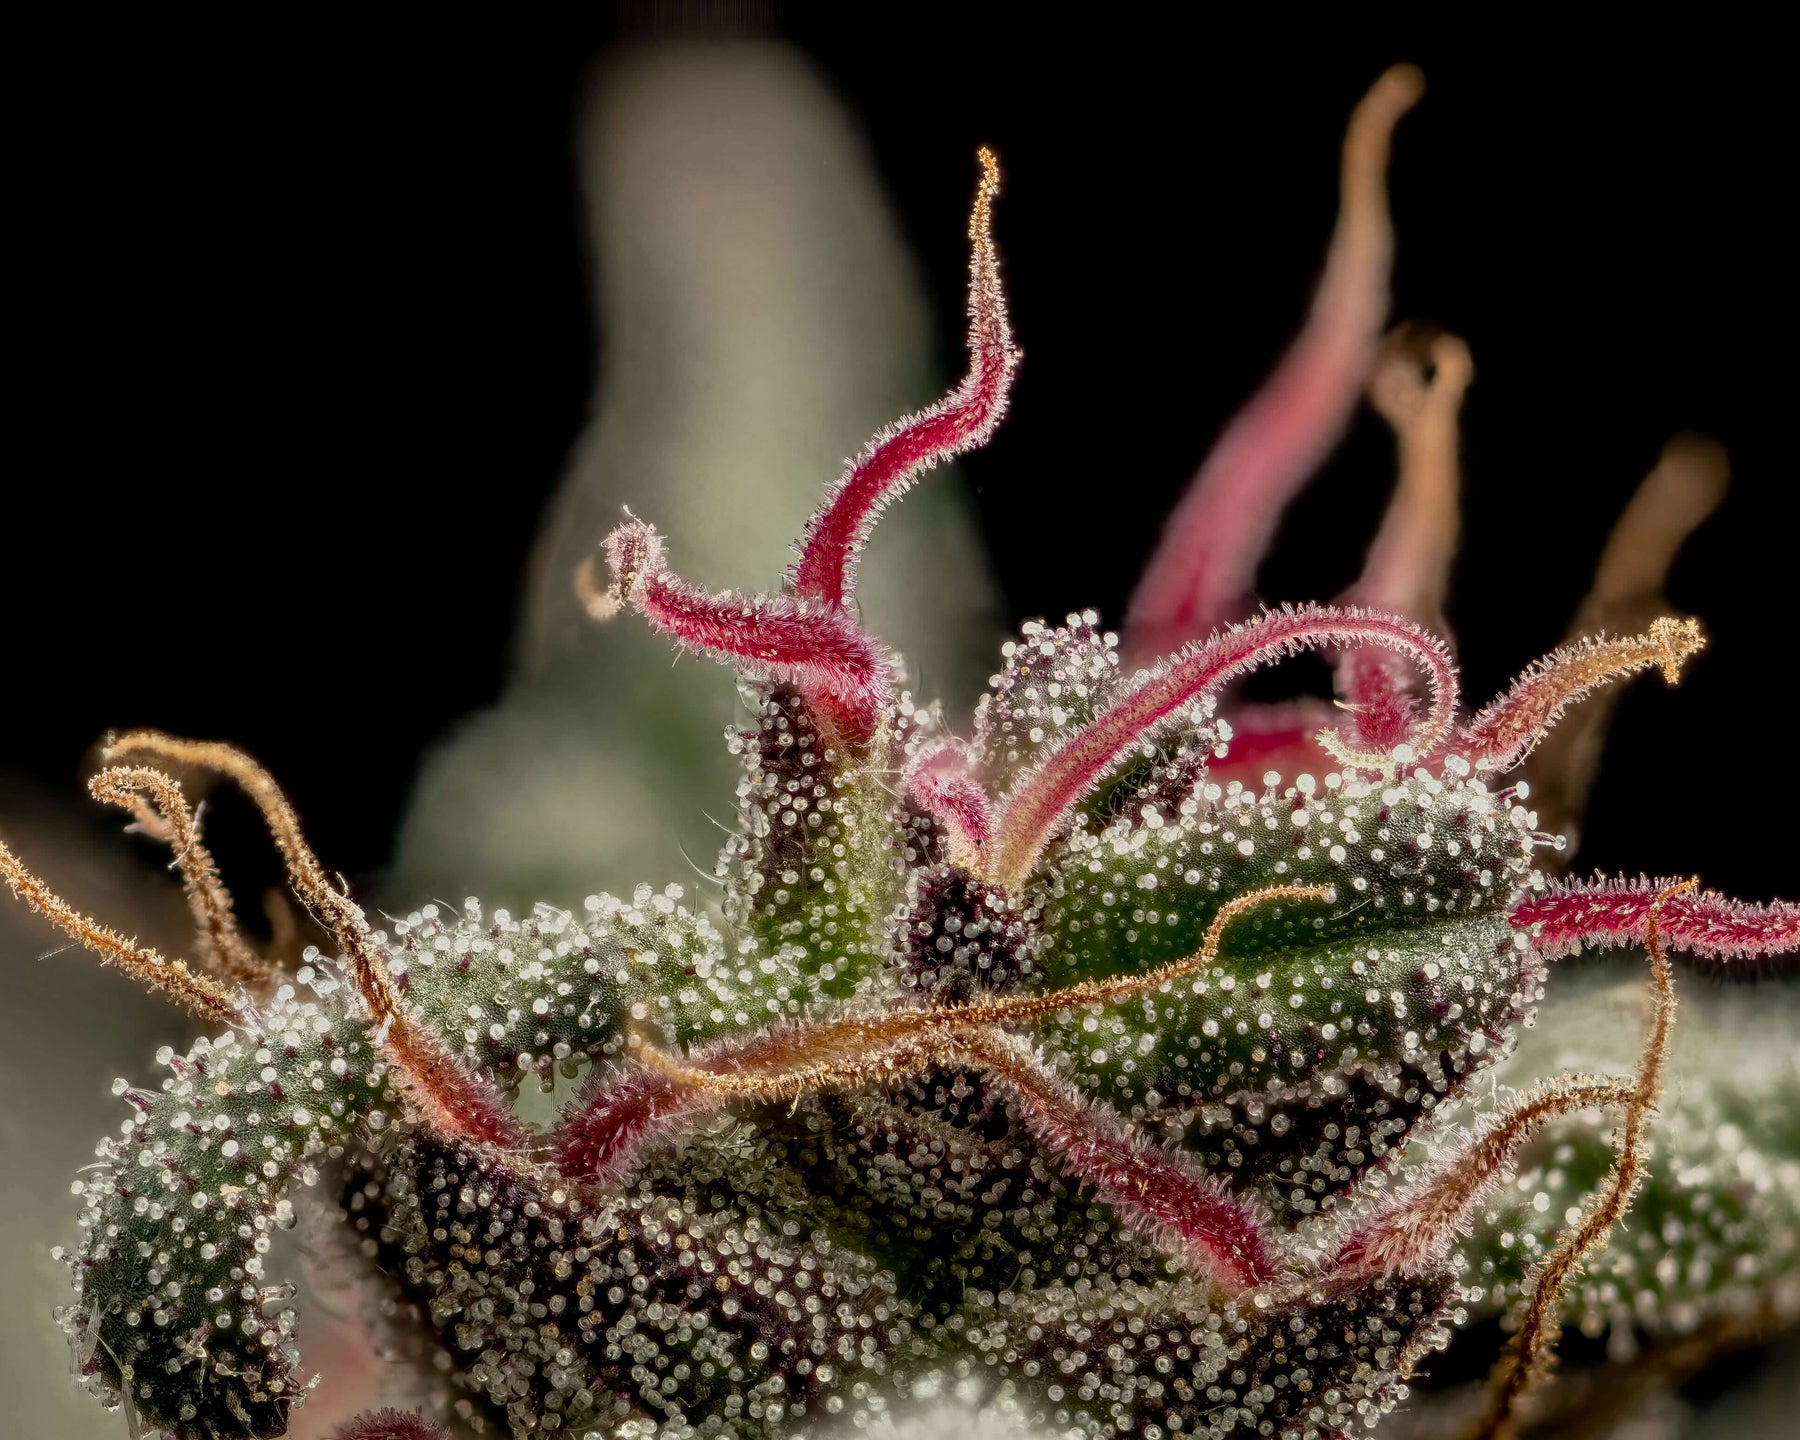 Trilogene Seeds: Honoring Cannabis Heritage with Legacy Strains